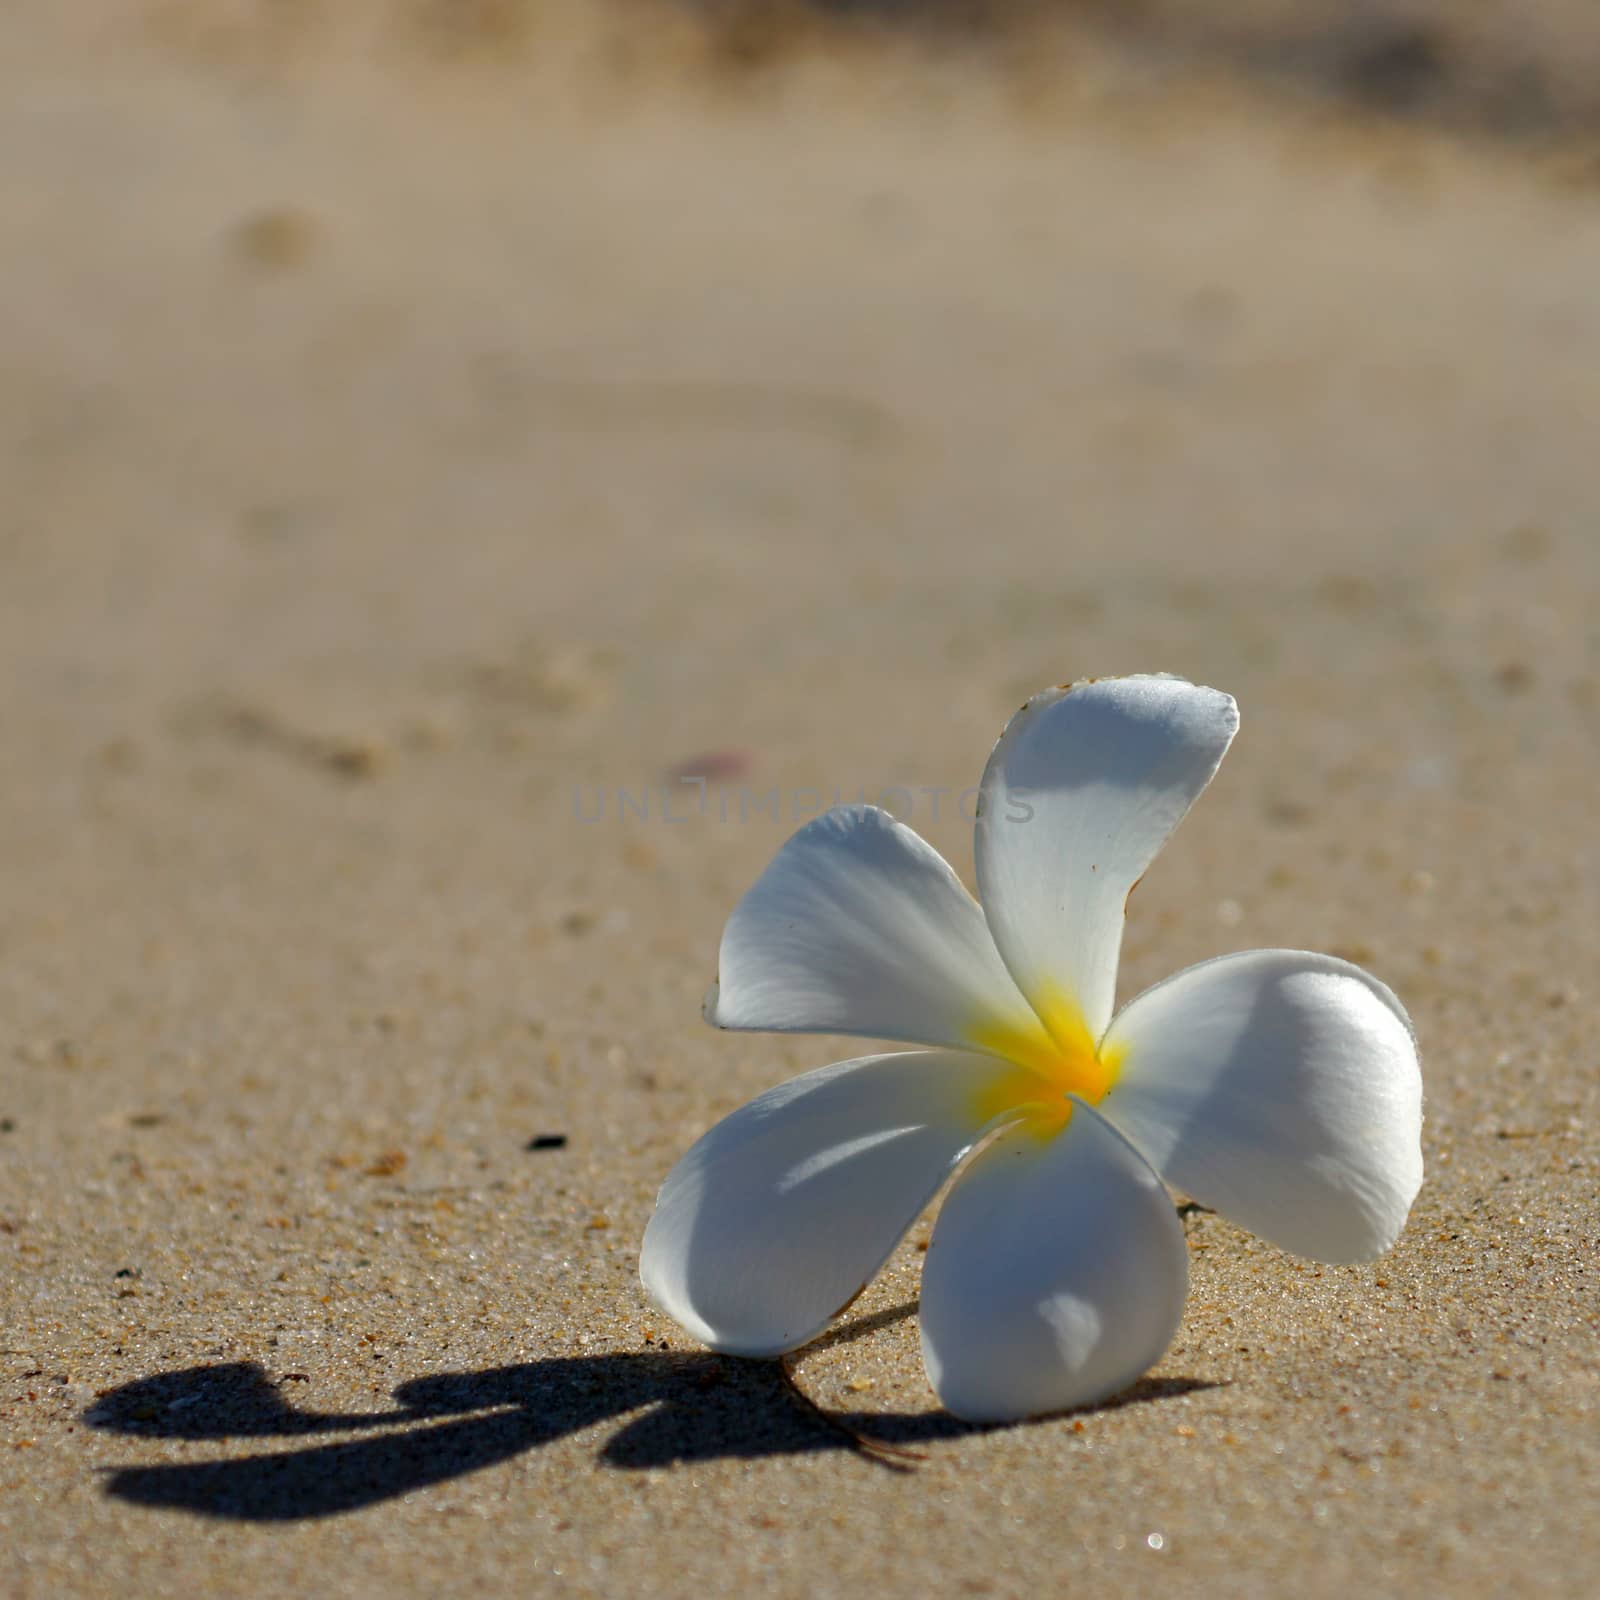 white and yellow frangipani flowers on the beach. by Noppharat_th